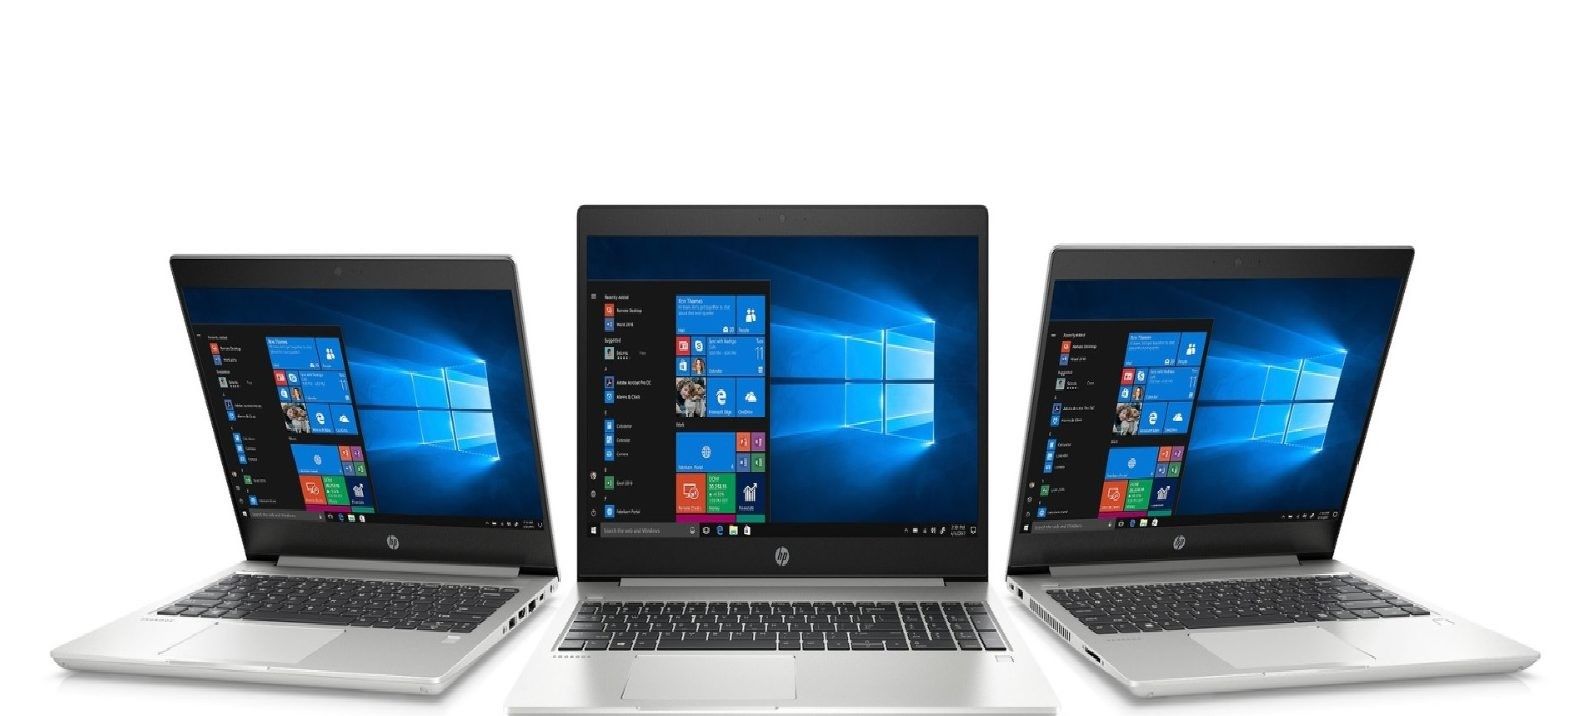 HP ProBook 430, 440, 450 G6 Notebook Review: Great Choice for Professionals